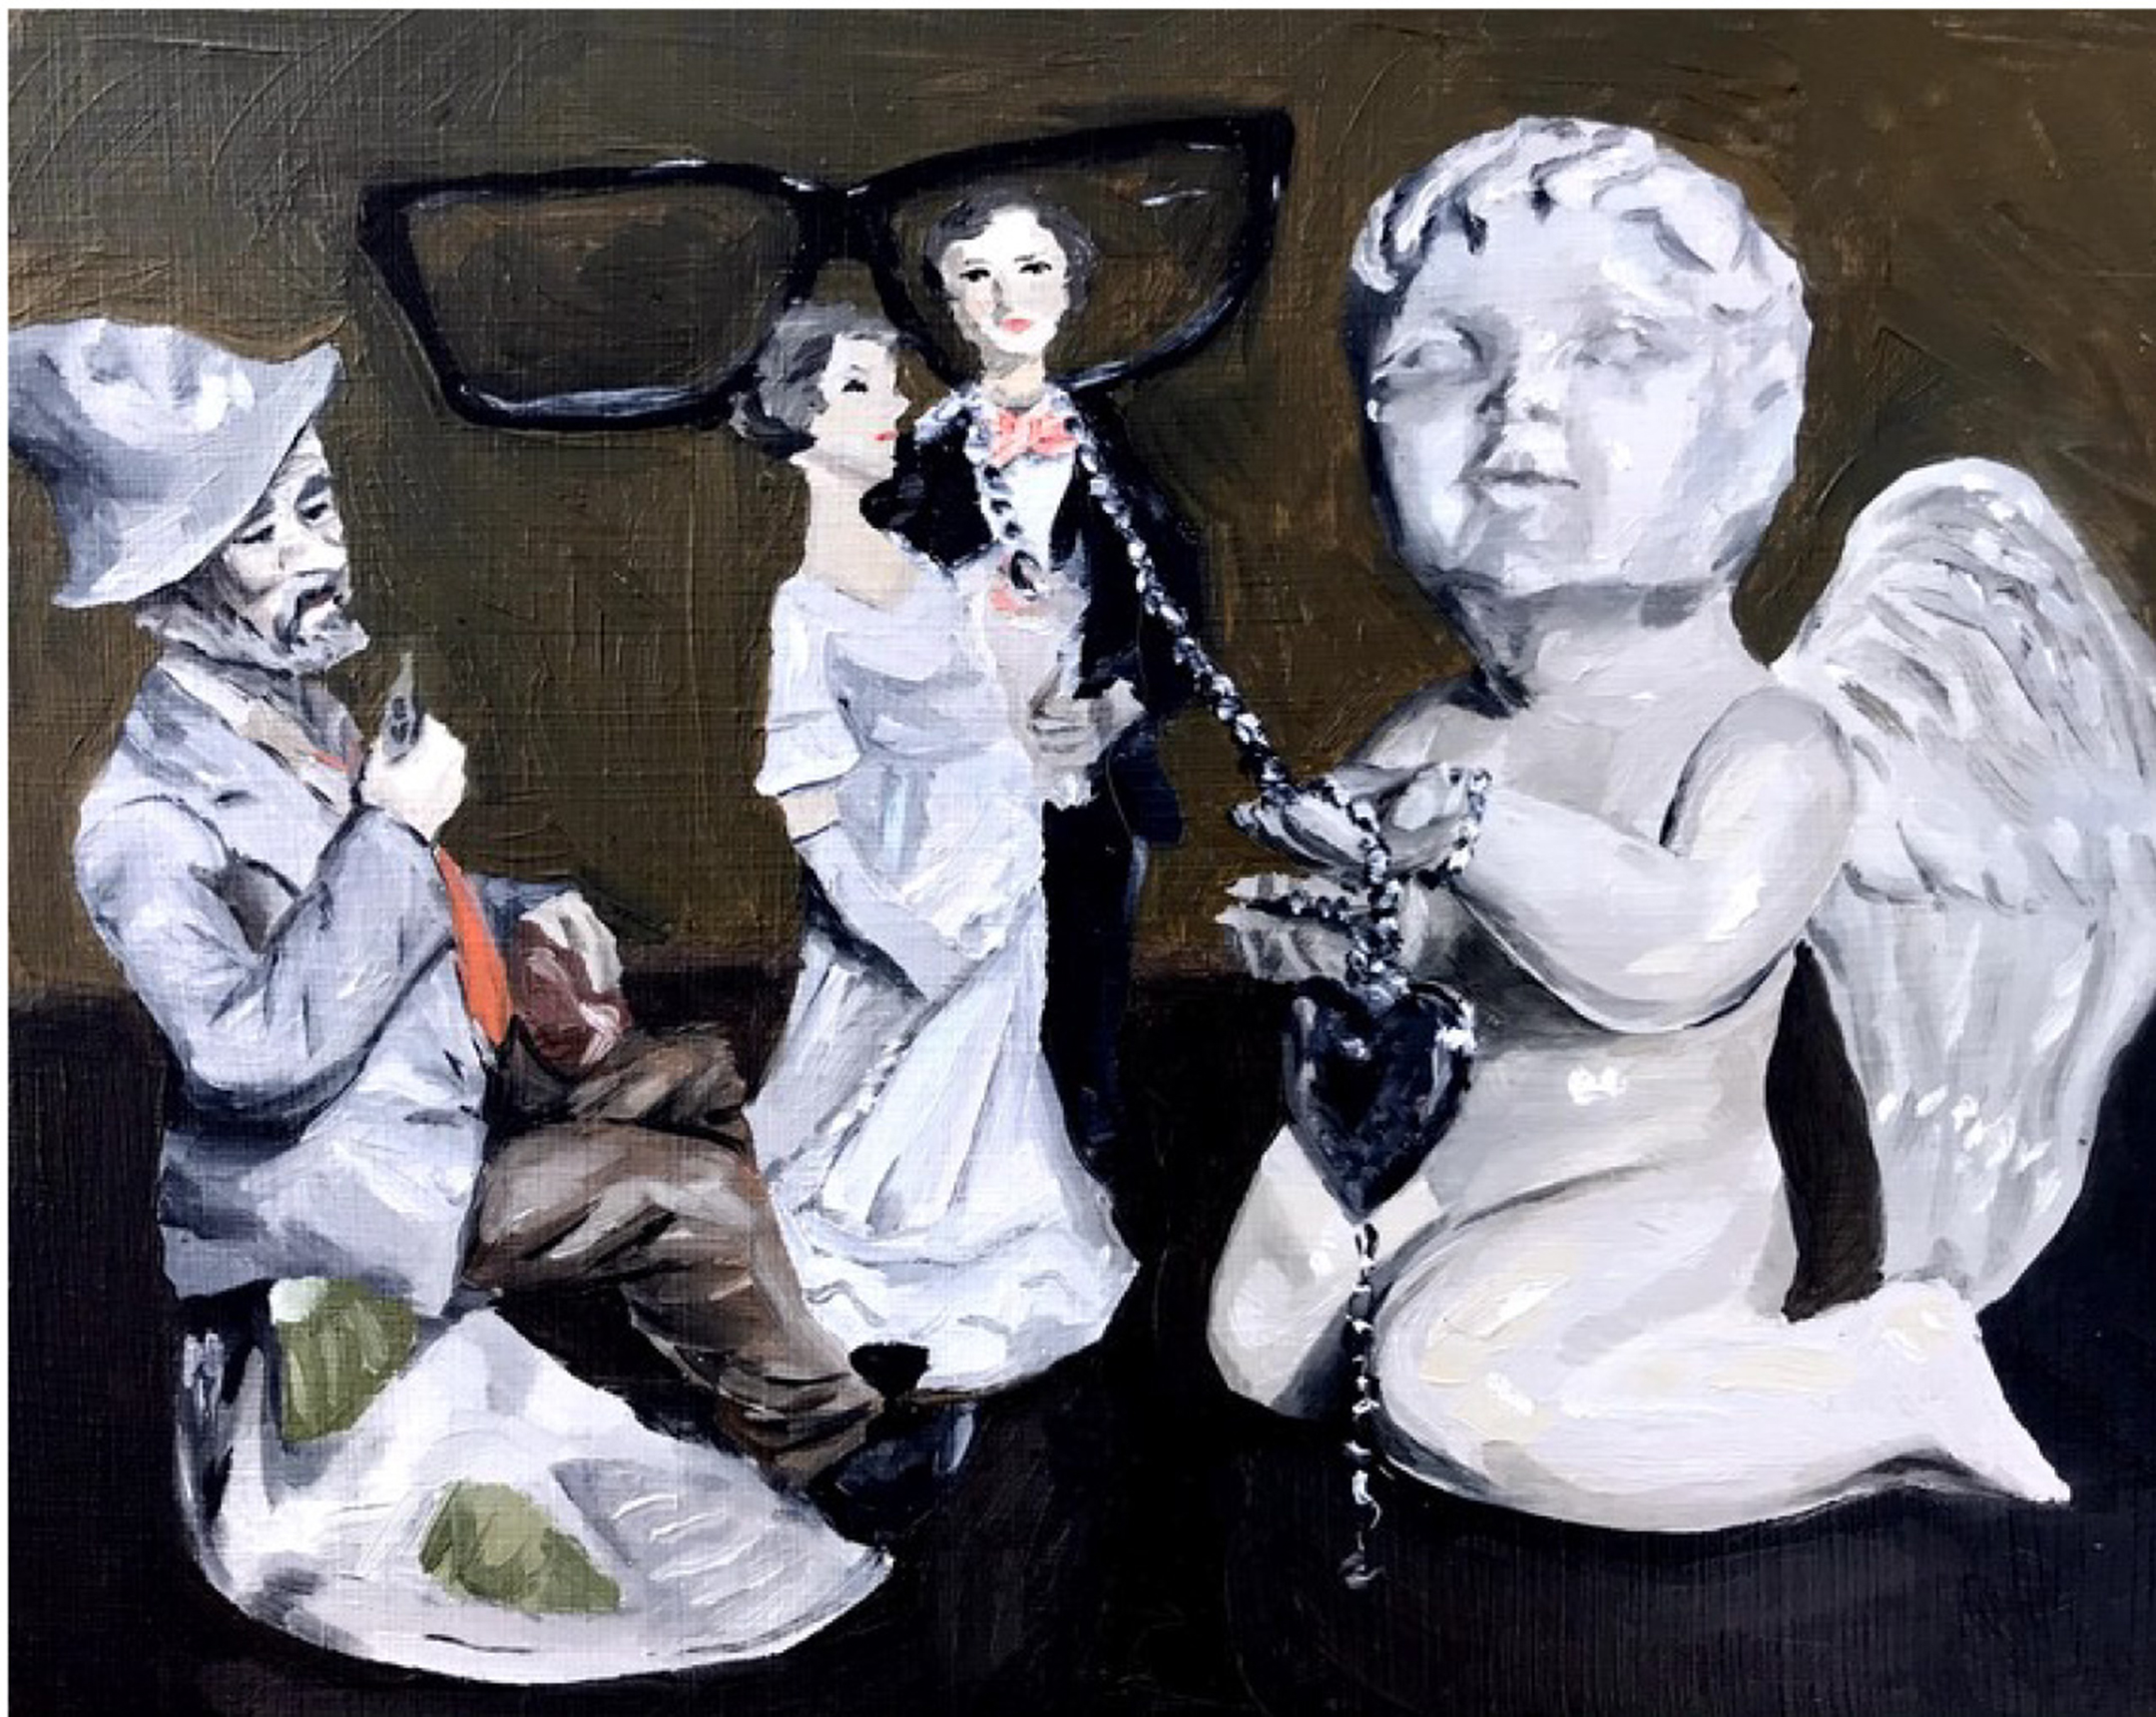 Painting of porcelain figures - a man, a married couple, and a cherub holding a silver necklace -- with a pair of black glasses in the background 